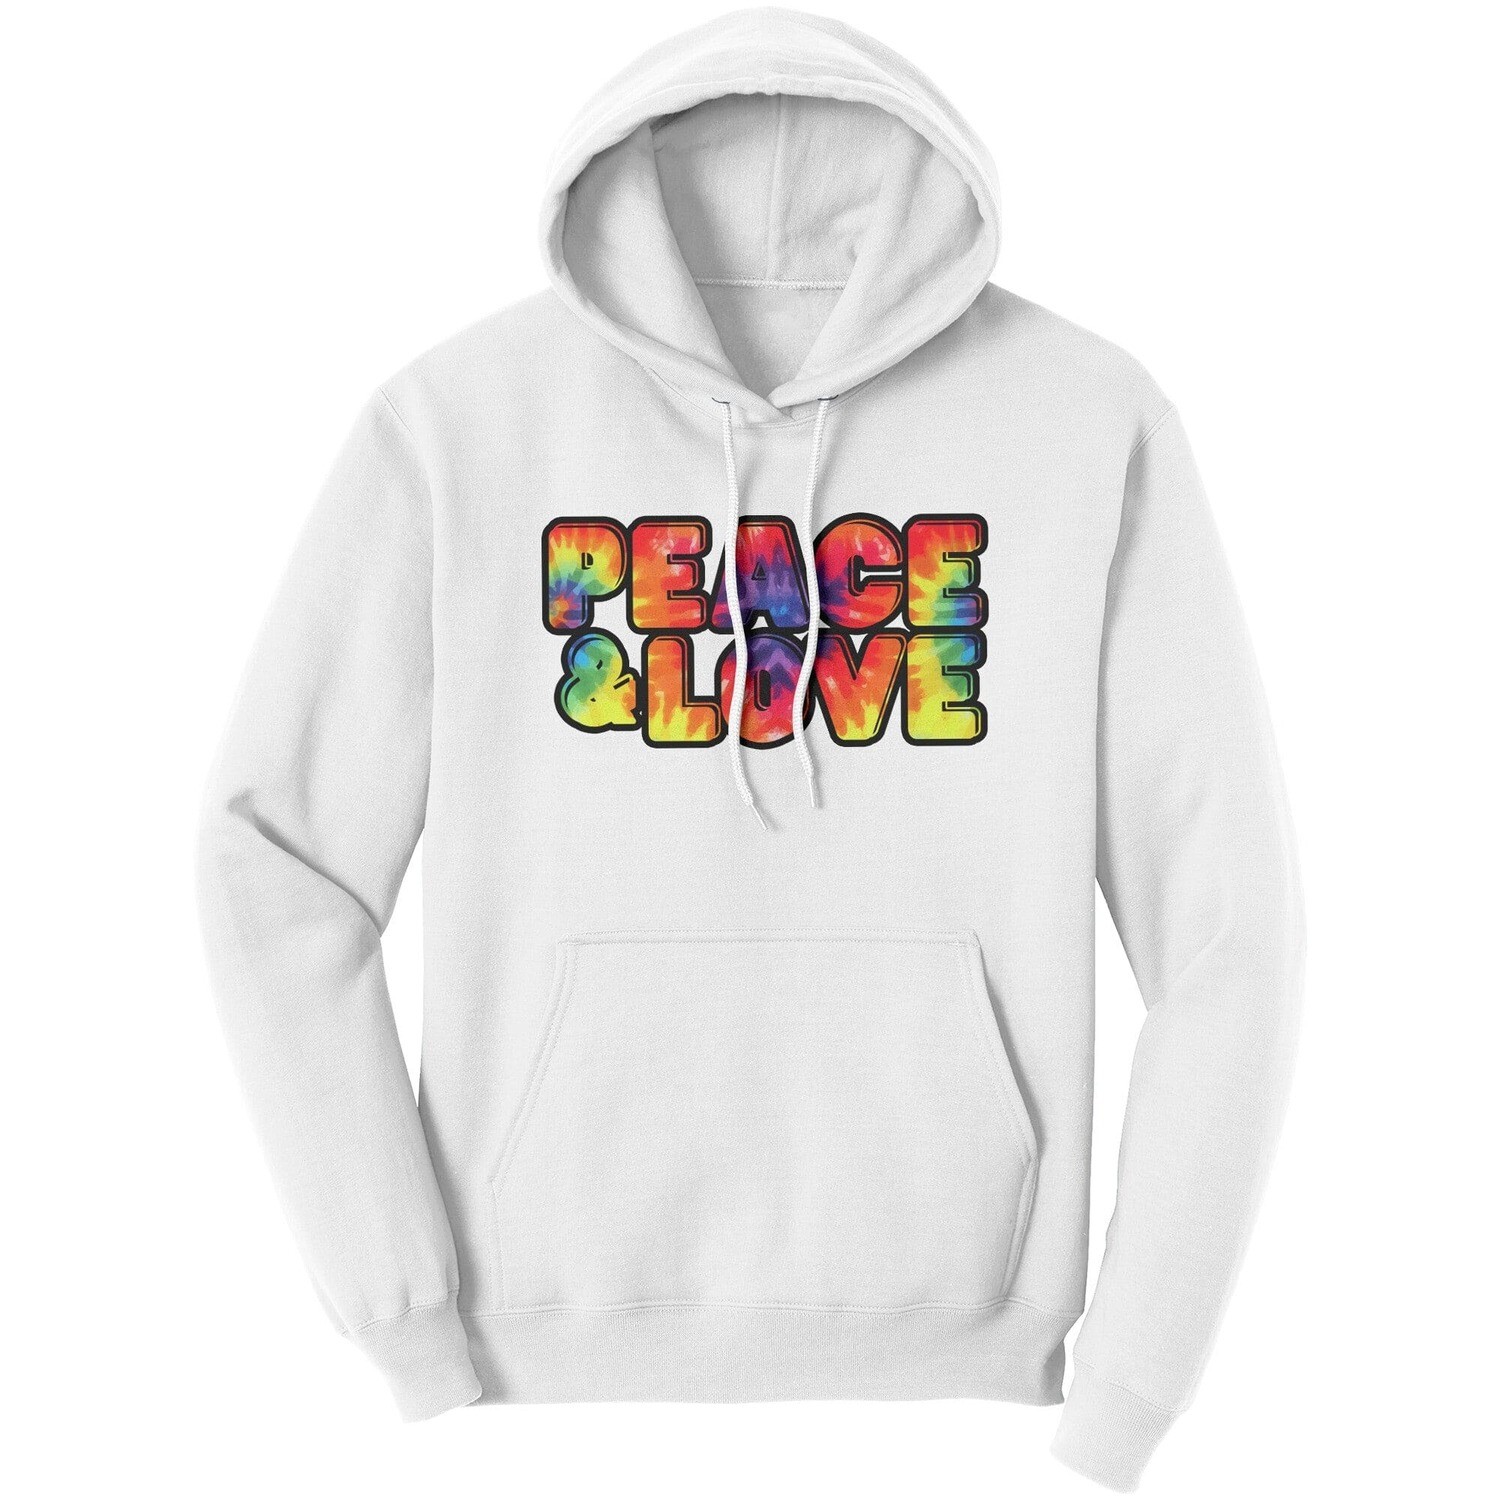 Uniquely You Graphic Hoodie Sweatshirt, Peace & Love Hooded Shirt